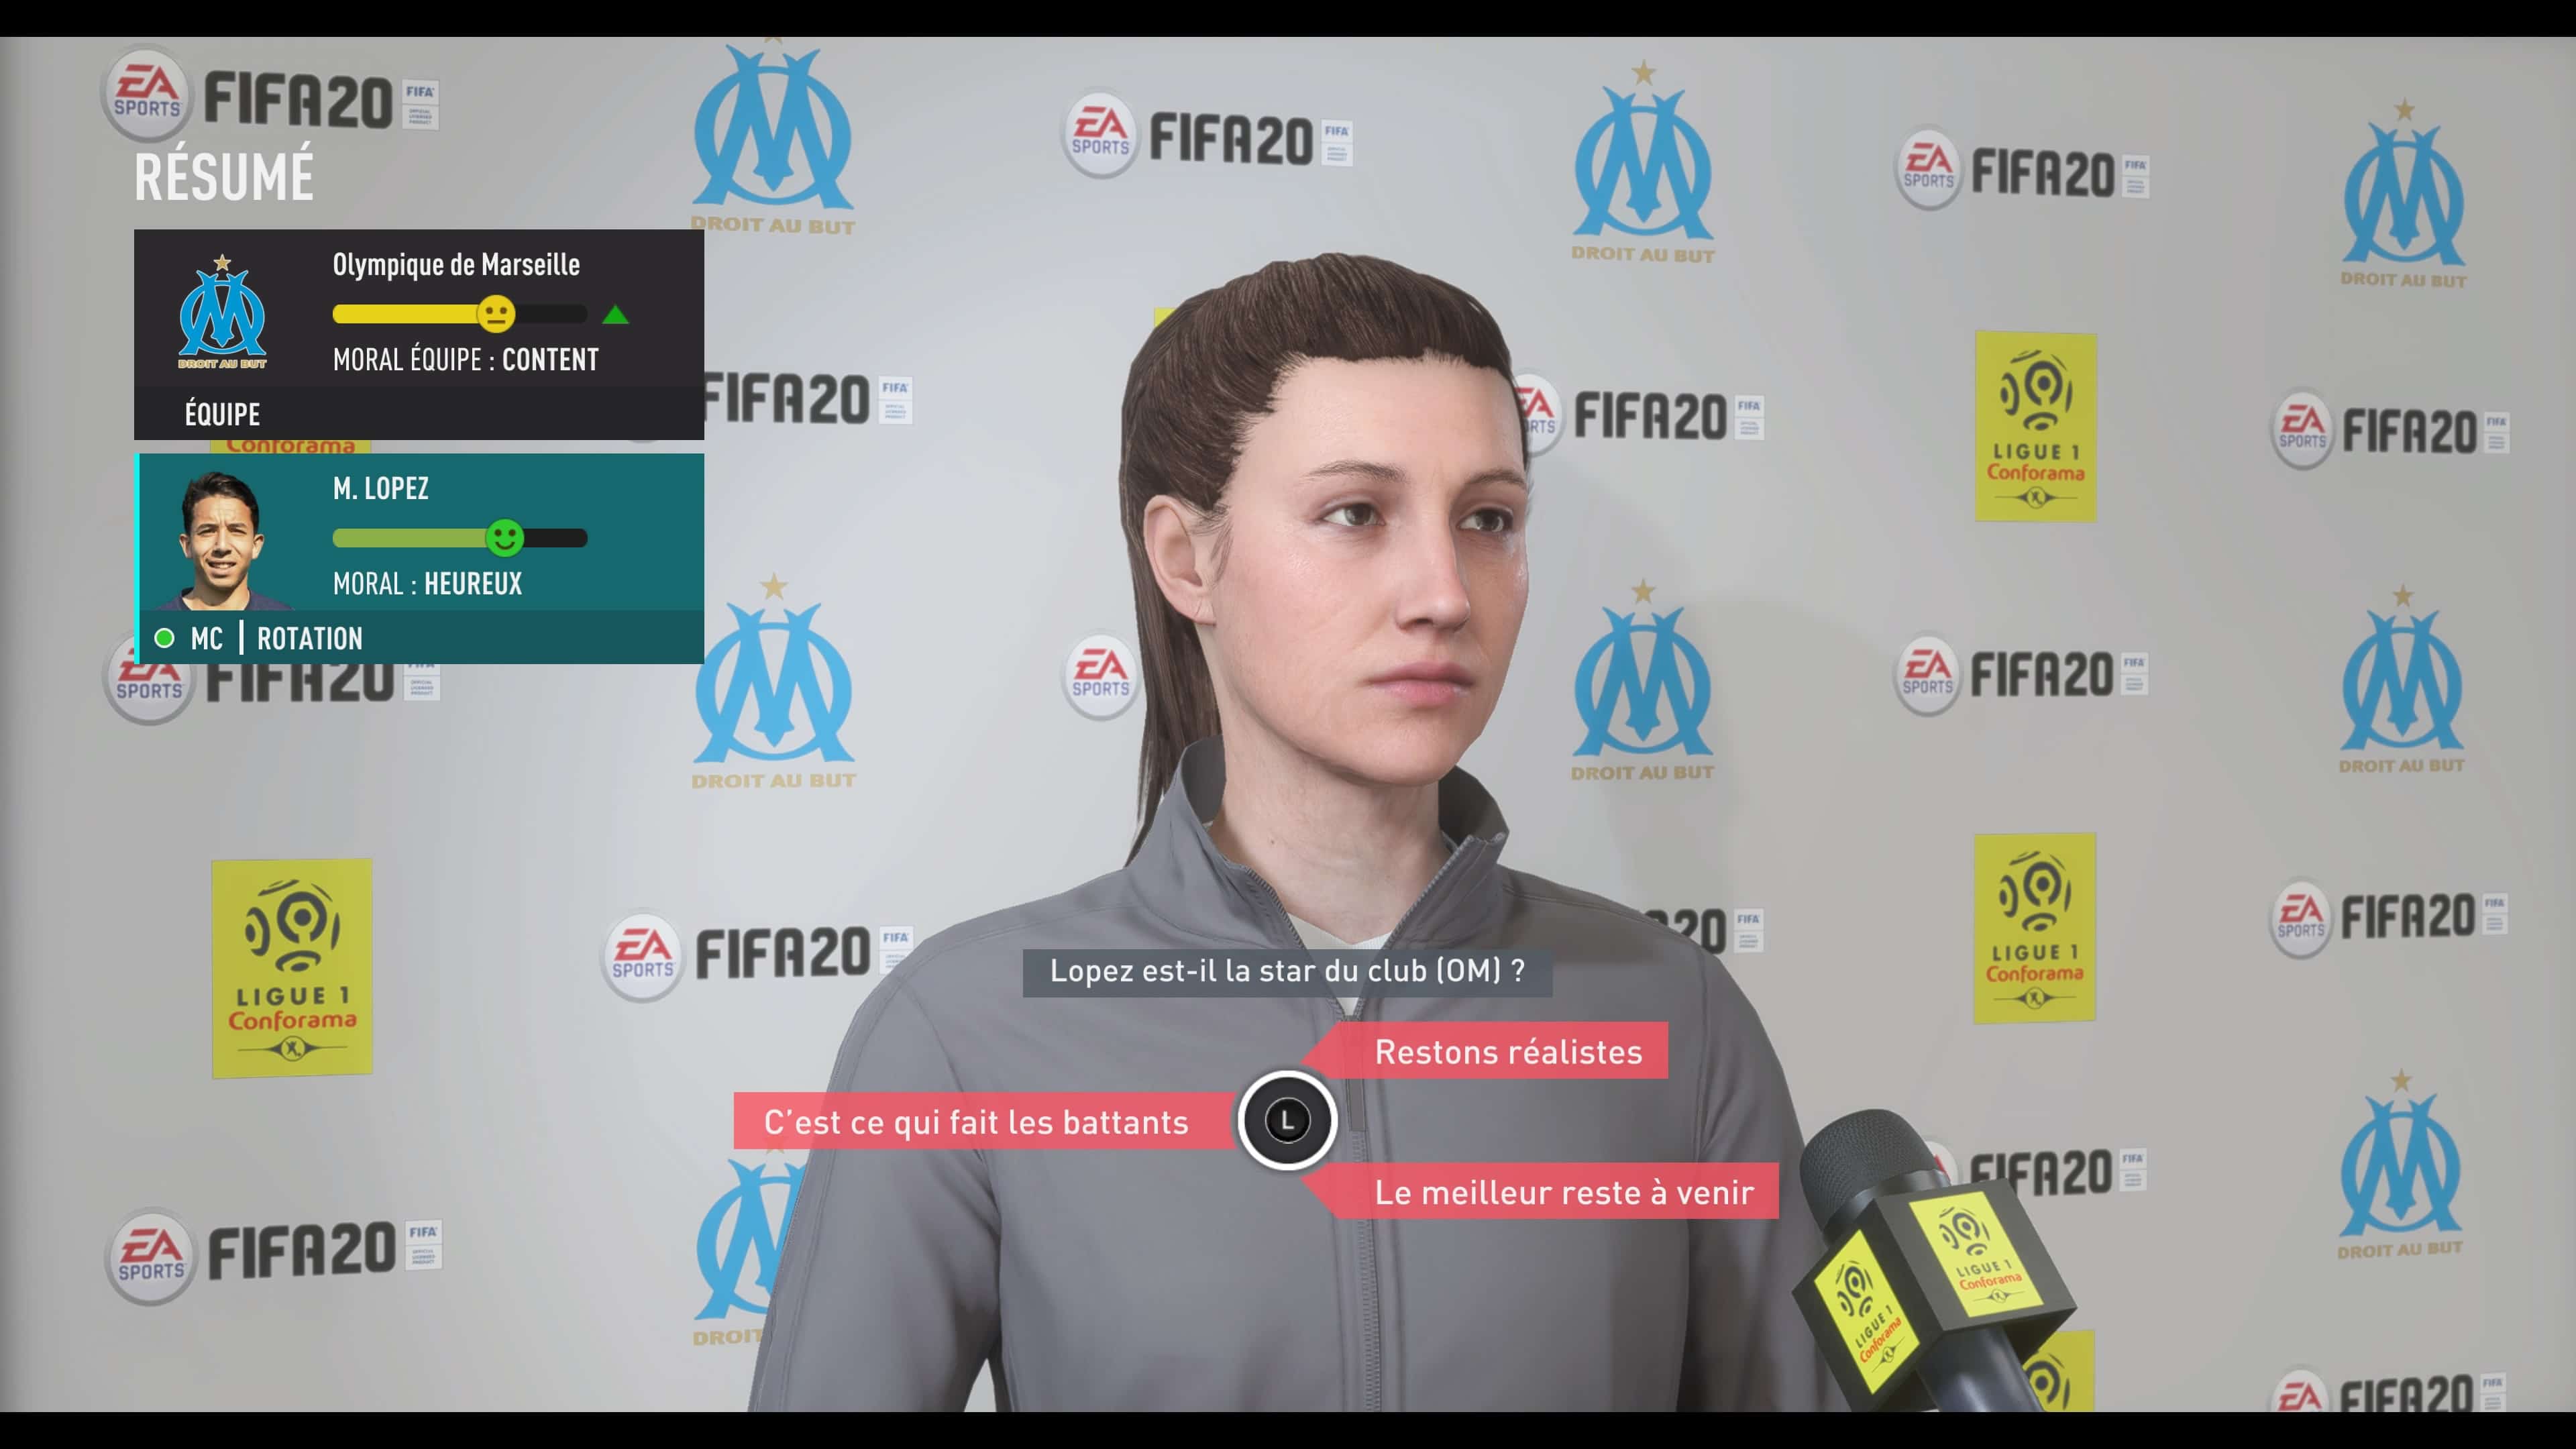 Fifa 20 personnage interview carrière